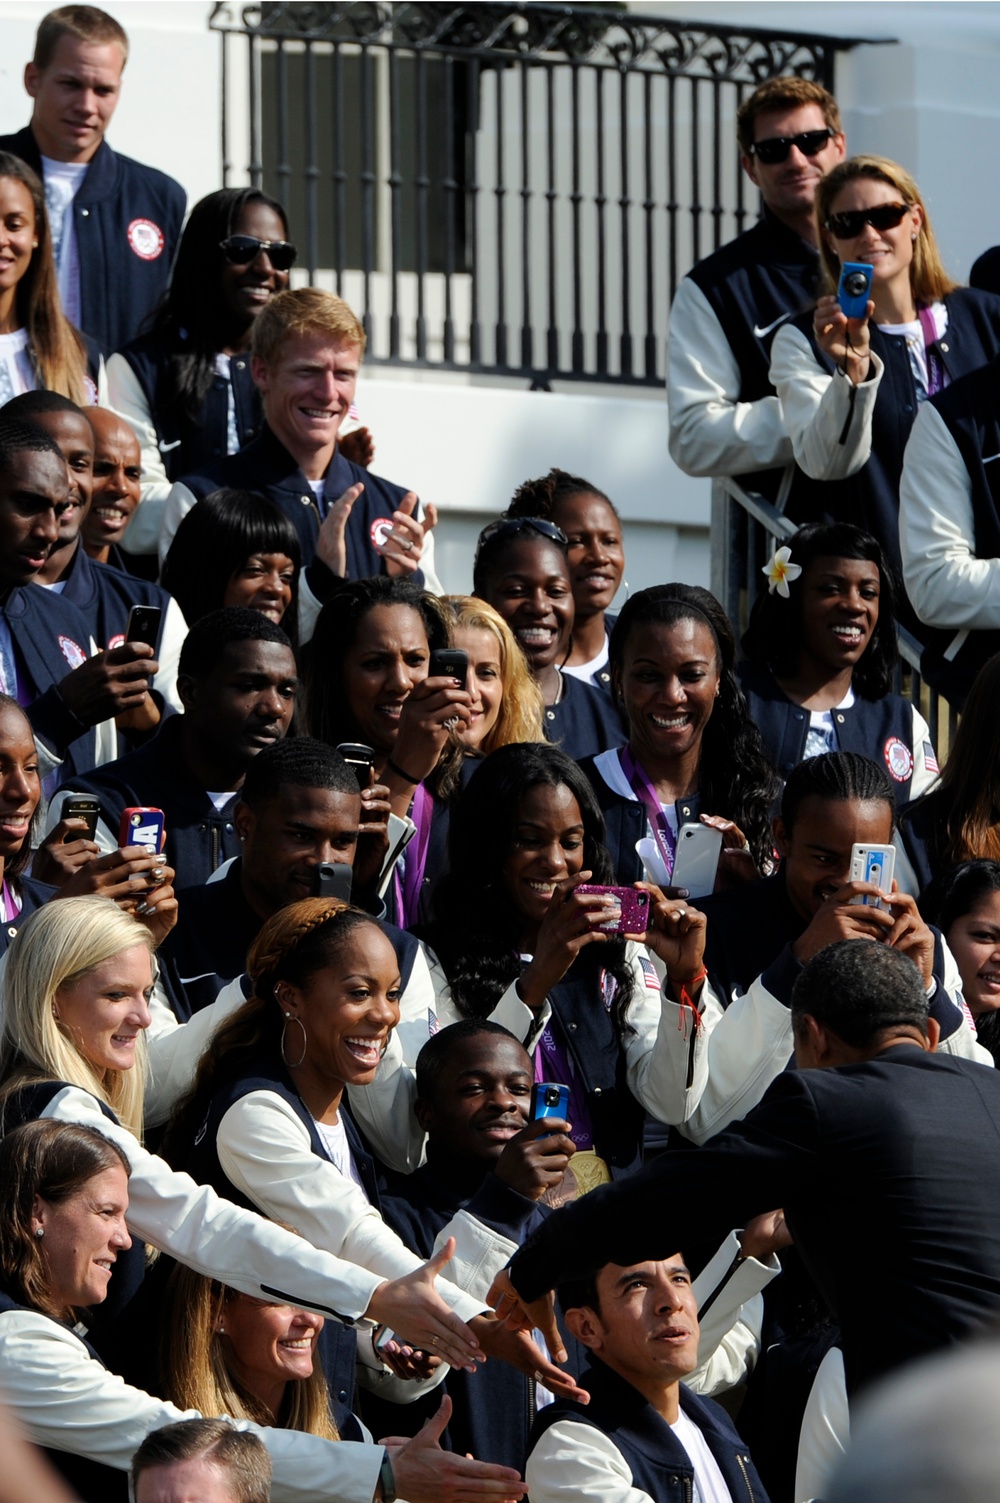 President welcomes US Olympic, Paralympic team members in ceremony